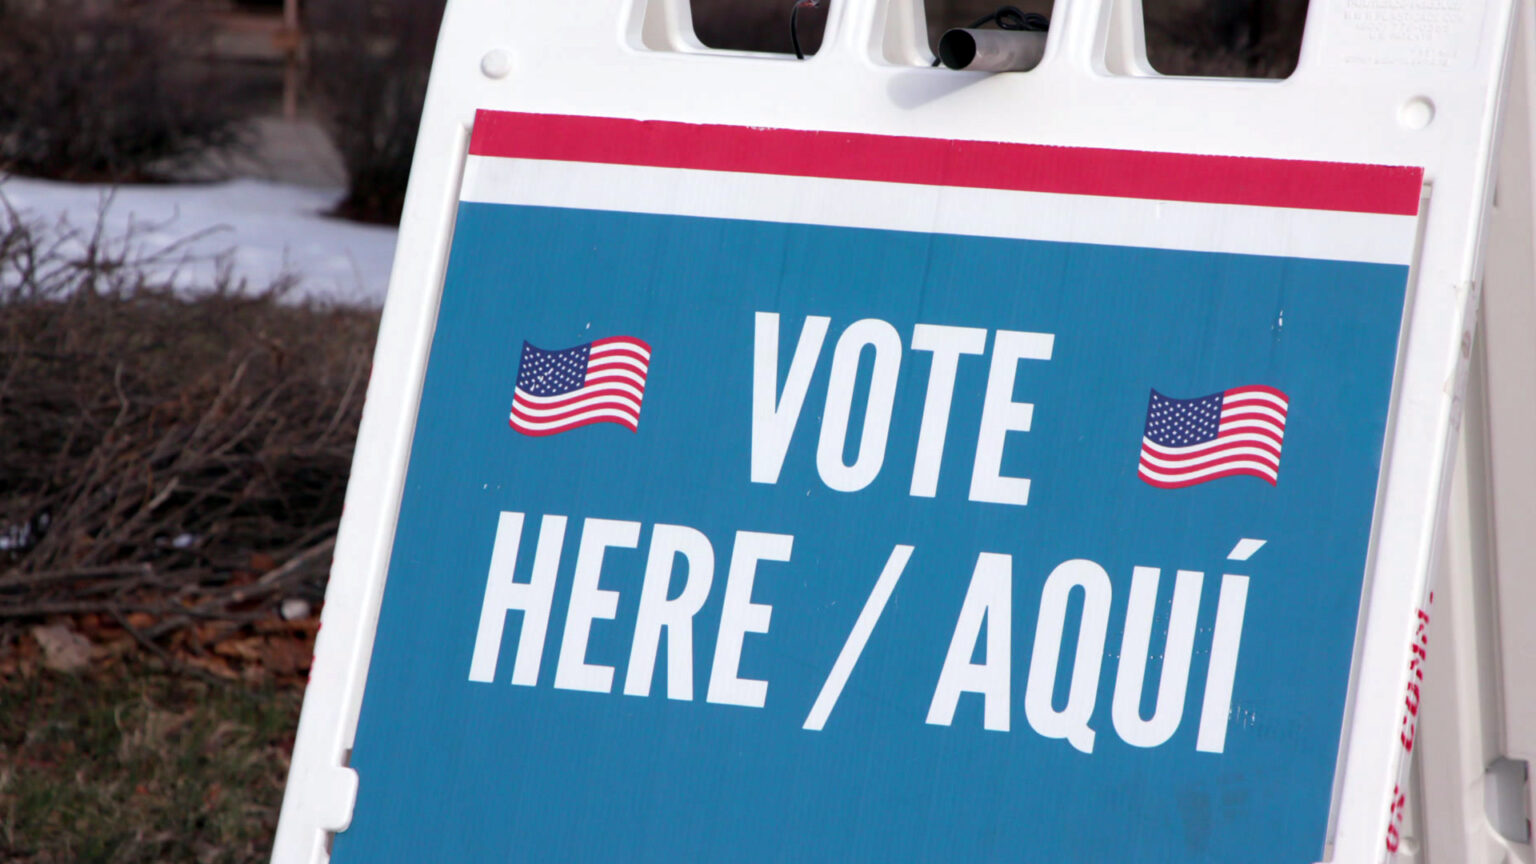 A plastic sandwich board sign with two U.S. flag graphics and the words VOTE HERE / AQUÍ stands next ground covered with fallen leaves and snow.